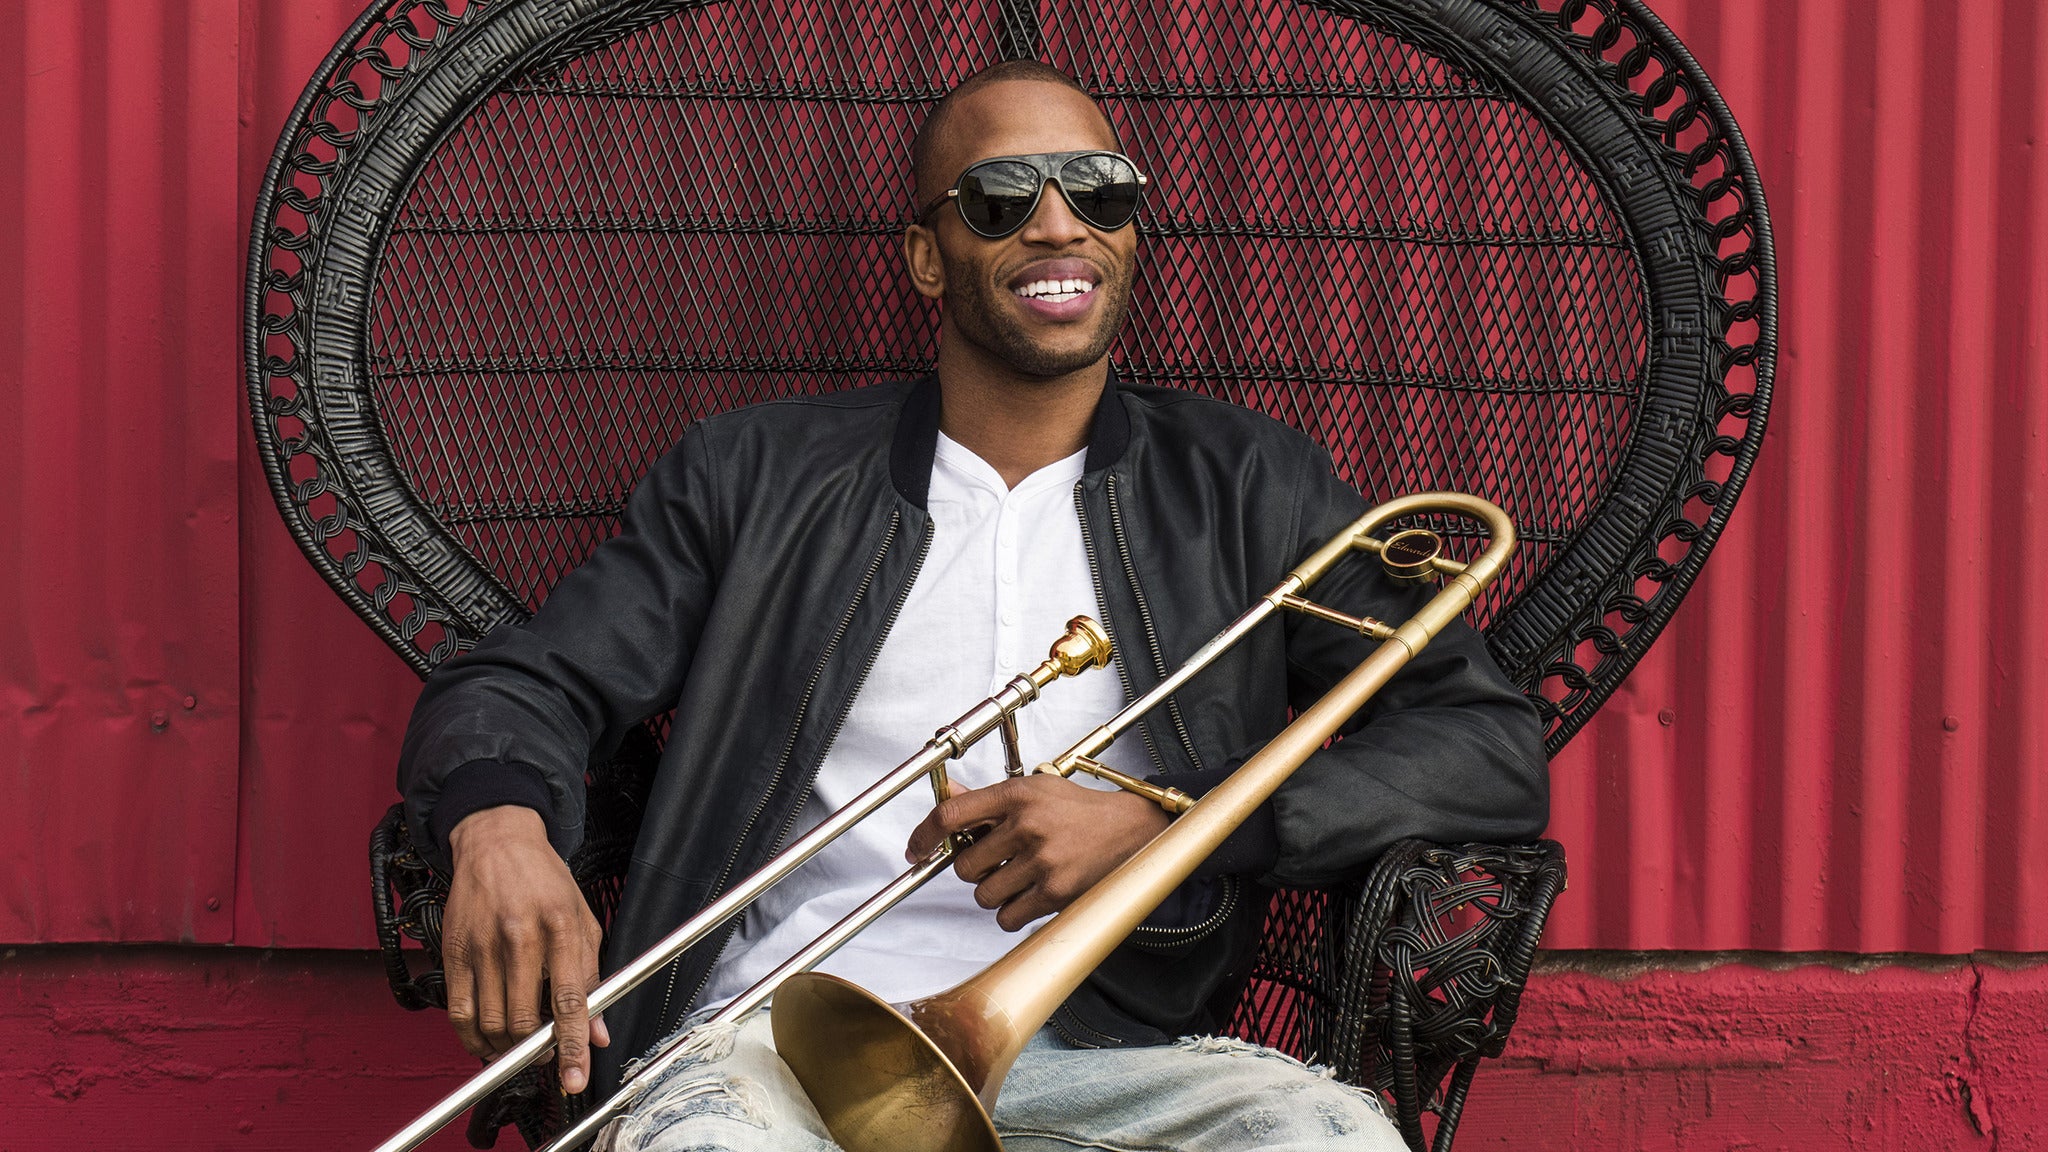 Trombone Shorty & Orleans Avenue pre-sale code for event tickets in Charleston, SC (The Charleston Music Hall)